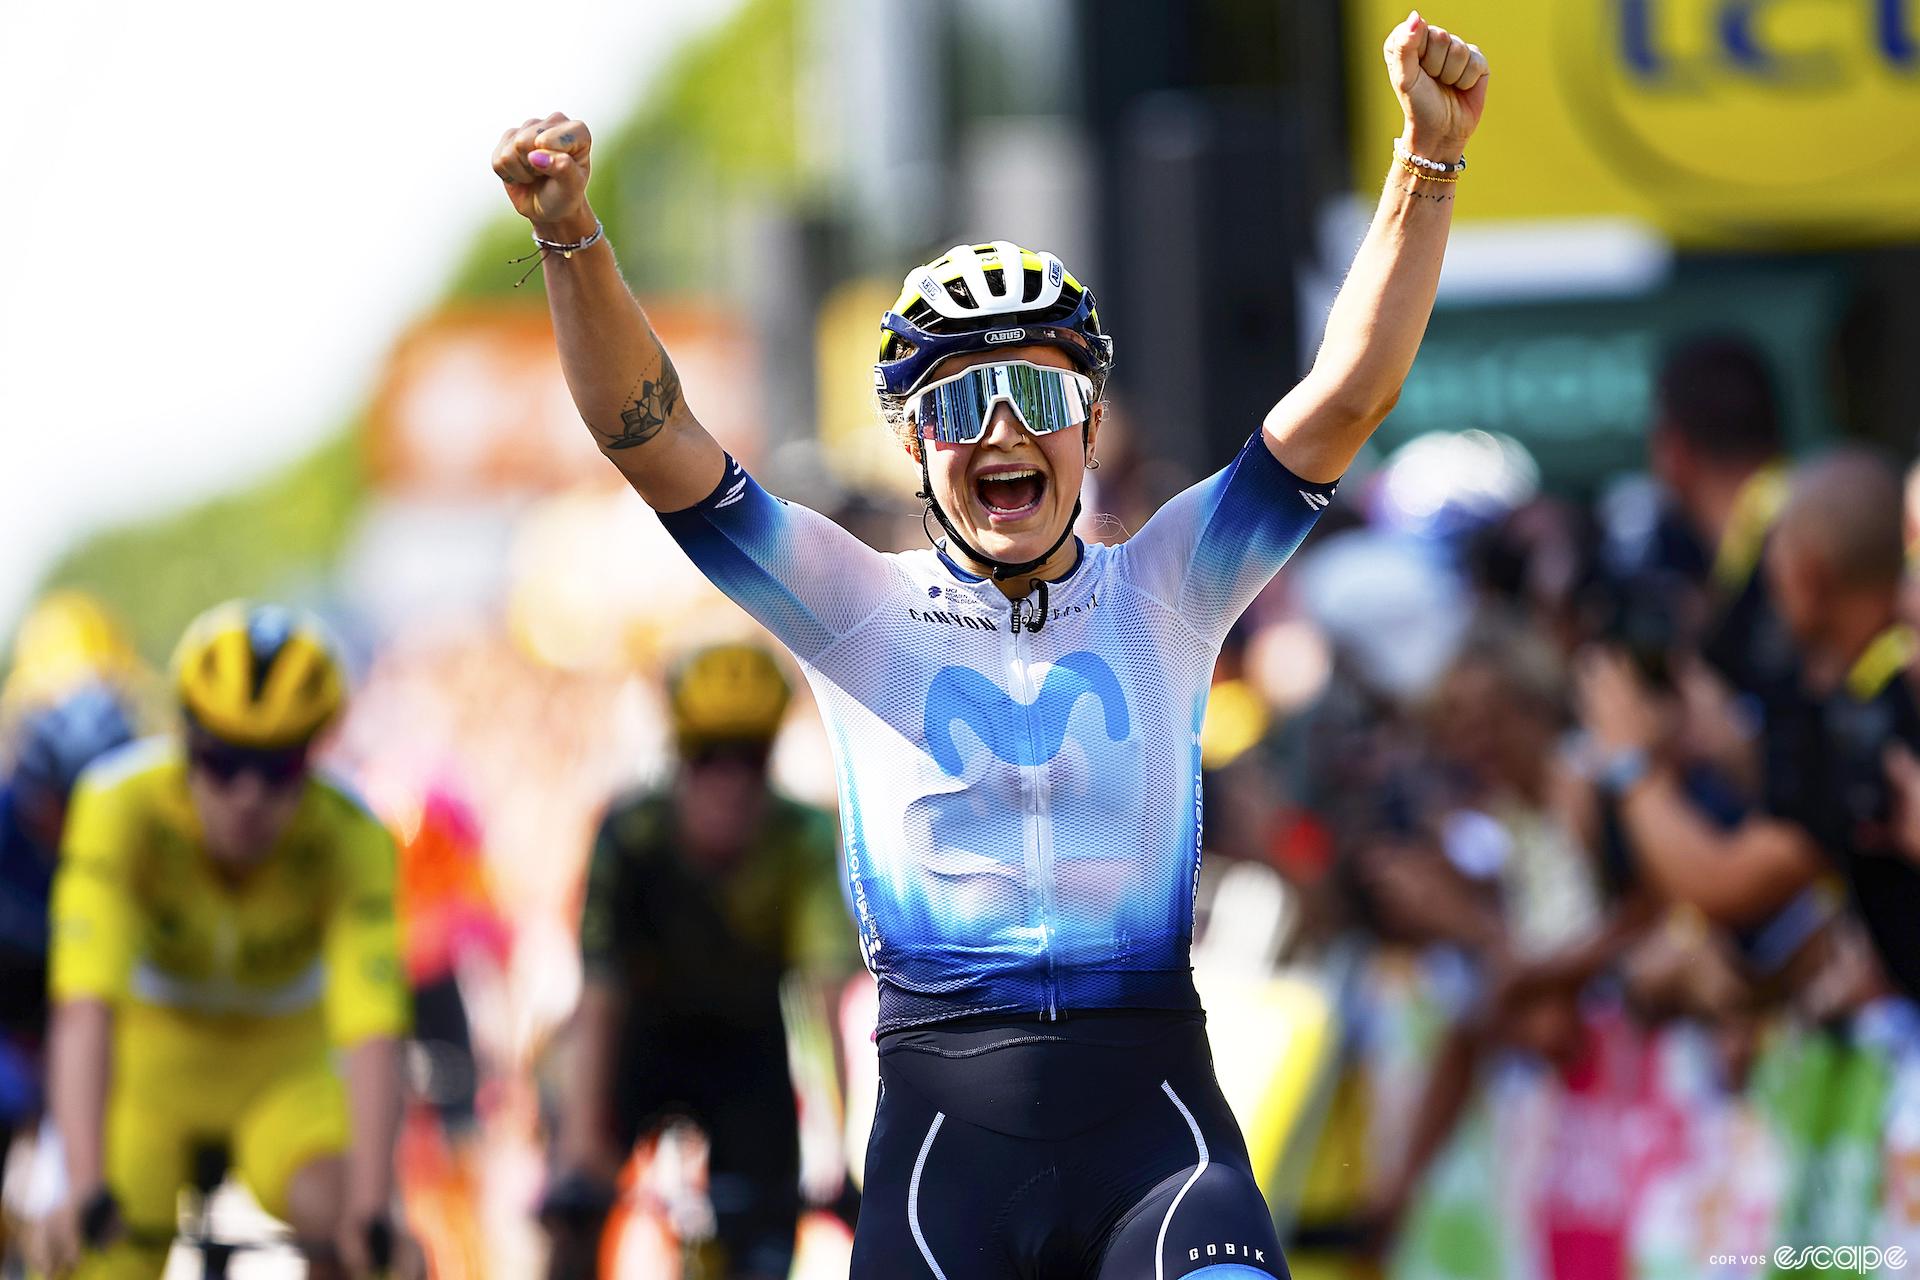 Emma Norsgaard reacts with joy as she wins stage 6 of the 2023 Tour de France Femmes. Norsgaard, who described herself as "not a sprinter" won from a long breakaway and sprinted well enough to hold off the field, including Lotte Kopecky, who is shown blurred behind in the yellow jersey of race leader.